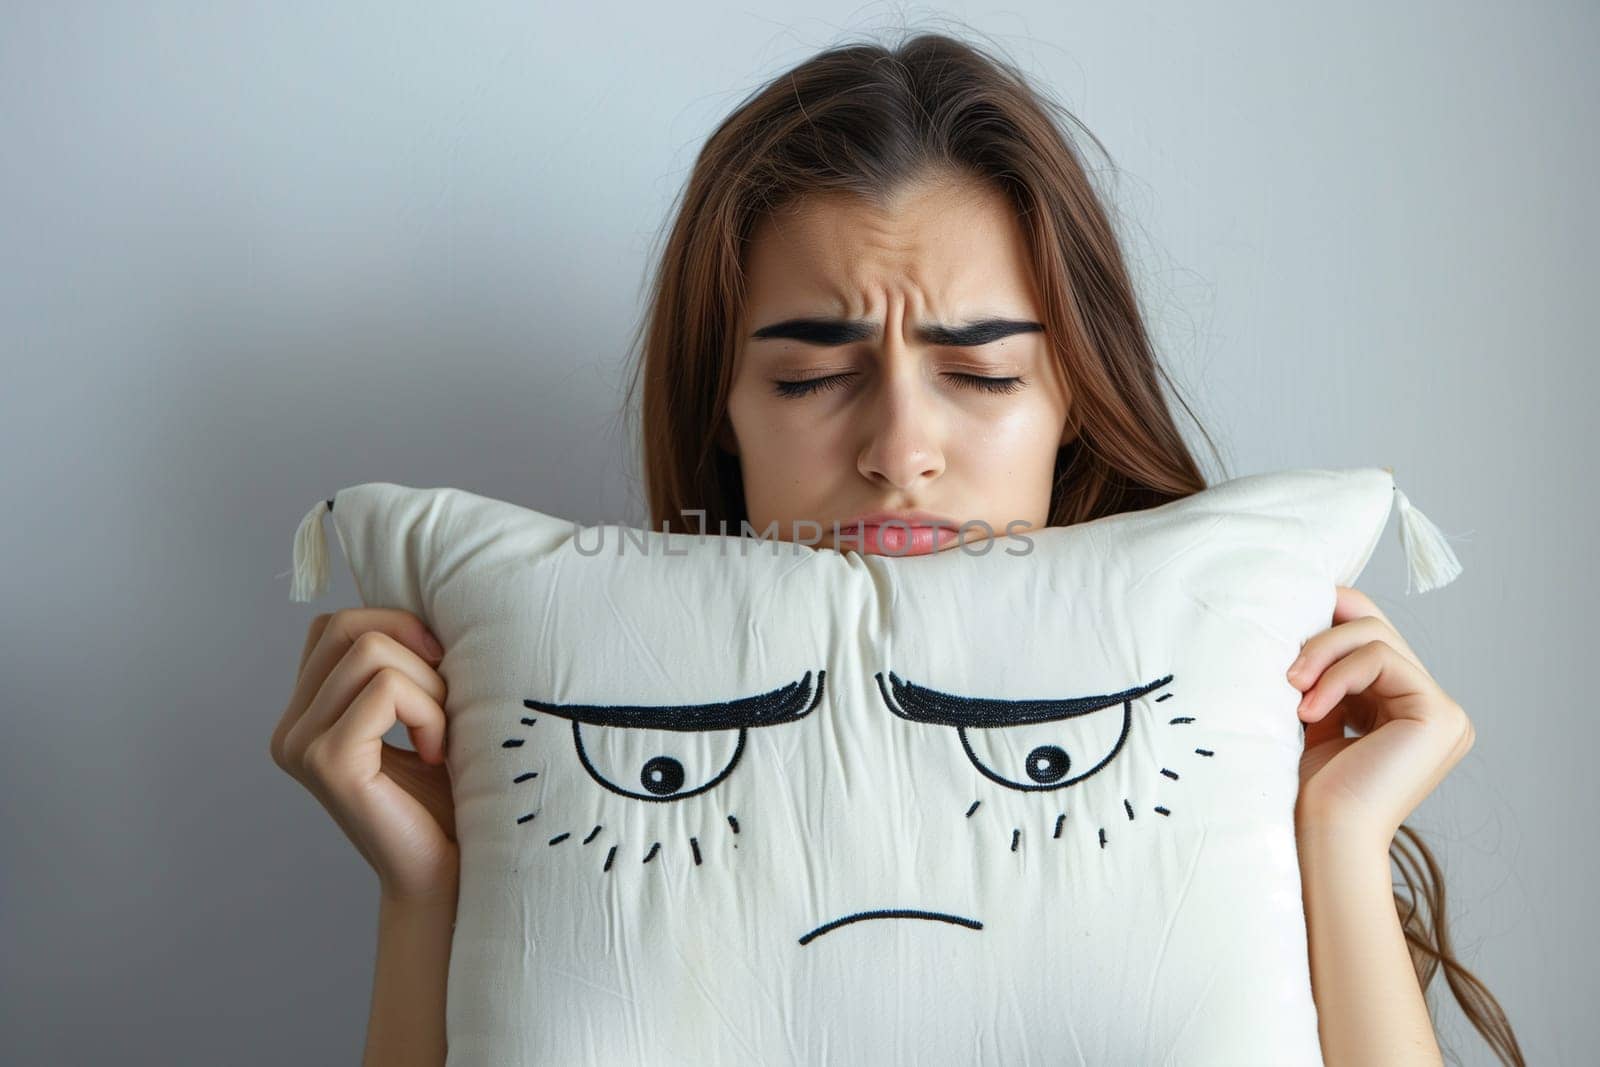 A woman is holding a pillow with a sad face on it, looking dejected and upset.